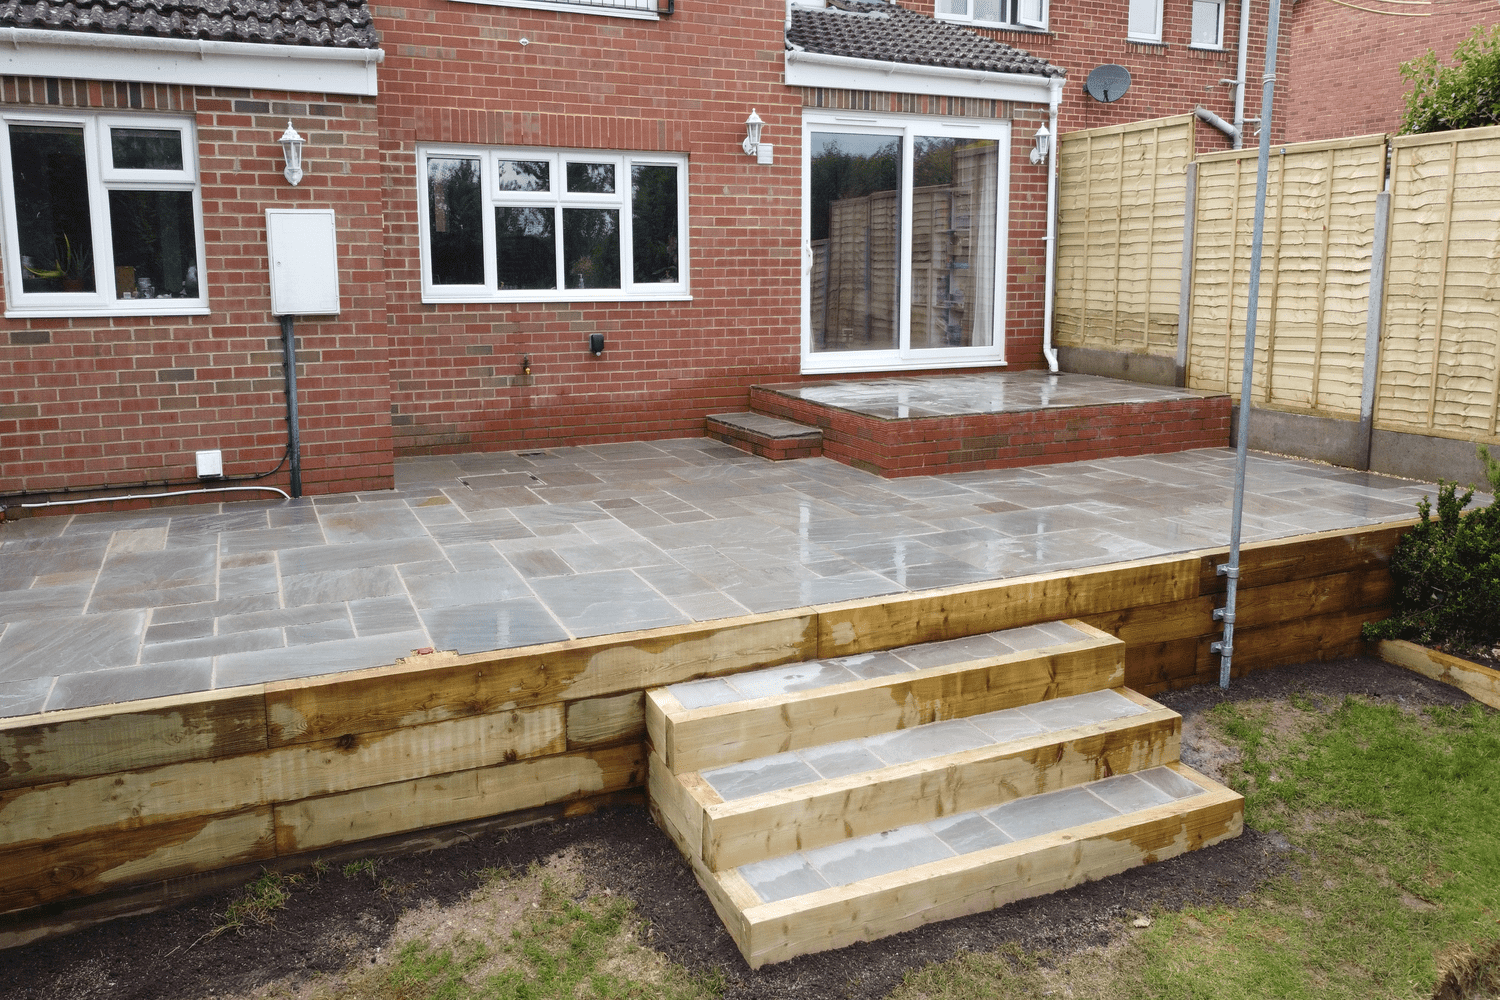 Sleeper steps and retaining wall